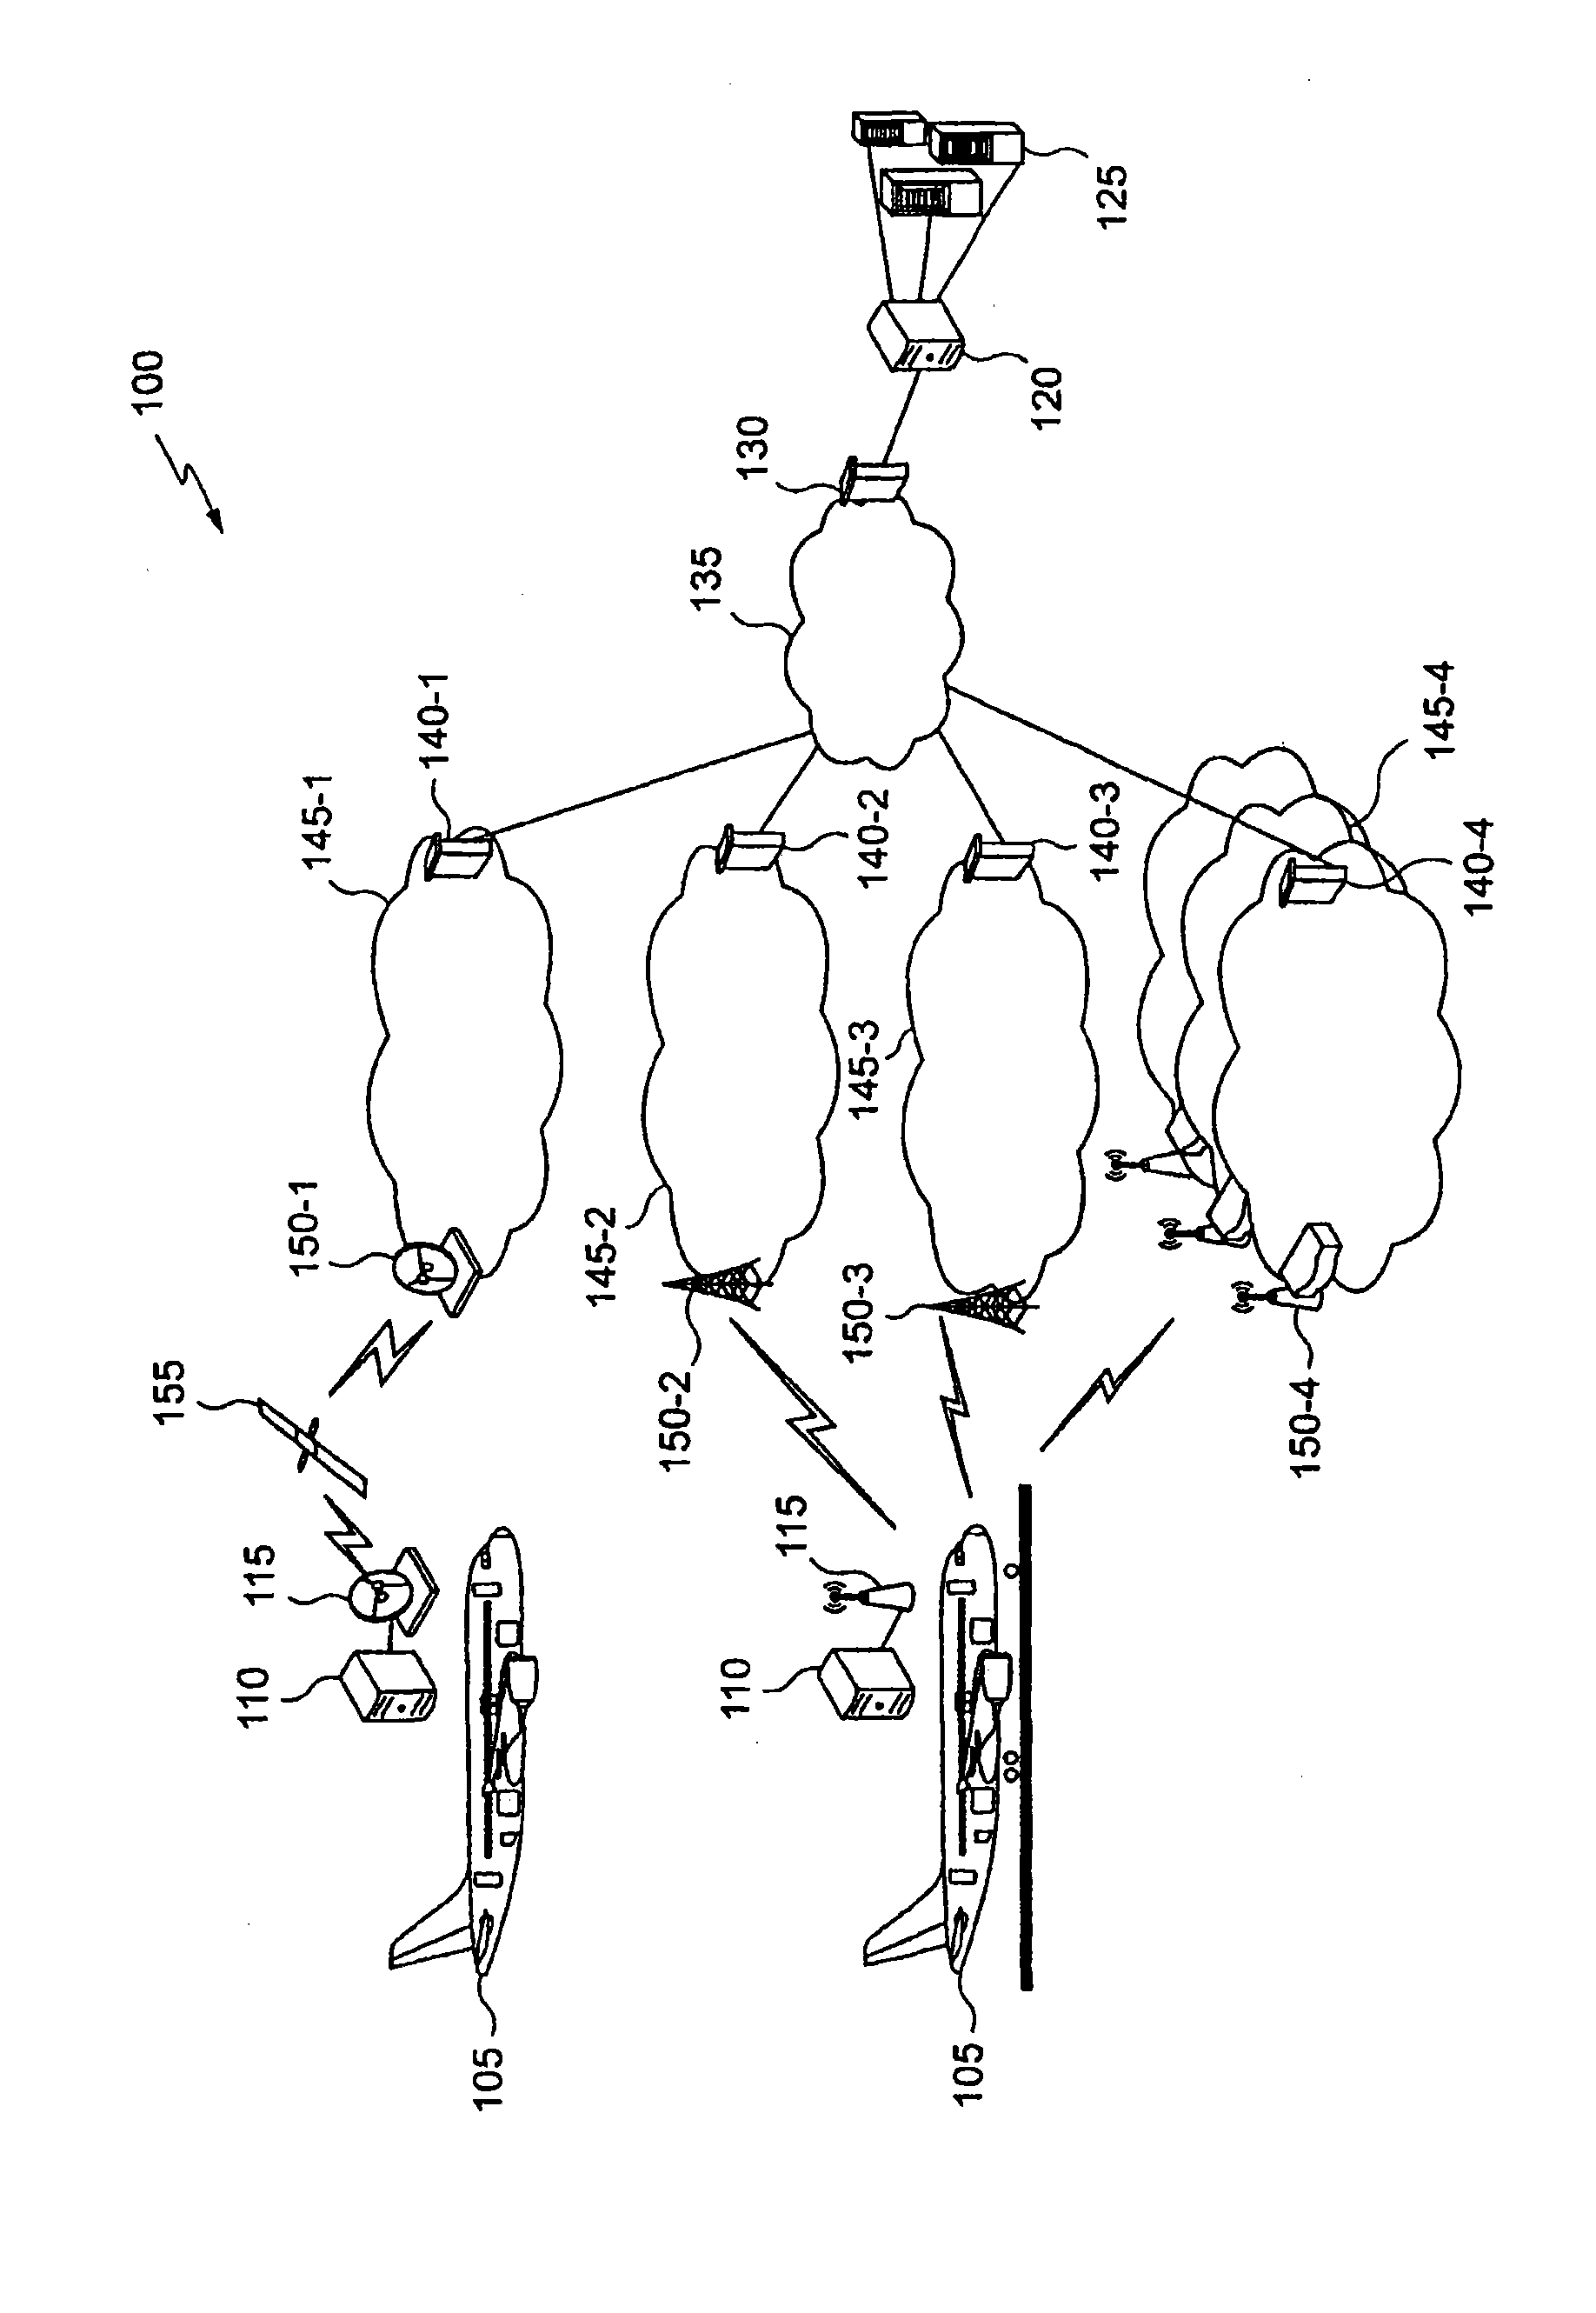 Method and device for managing communication channels for data exchange from an aircraft